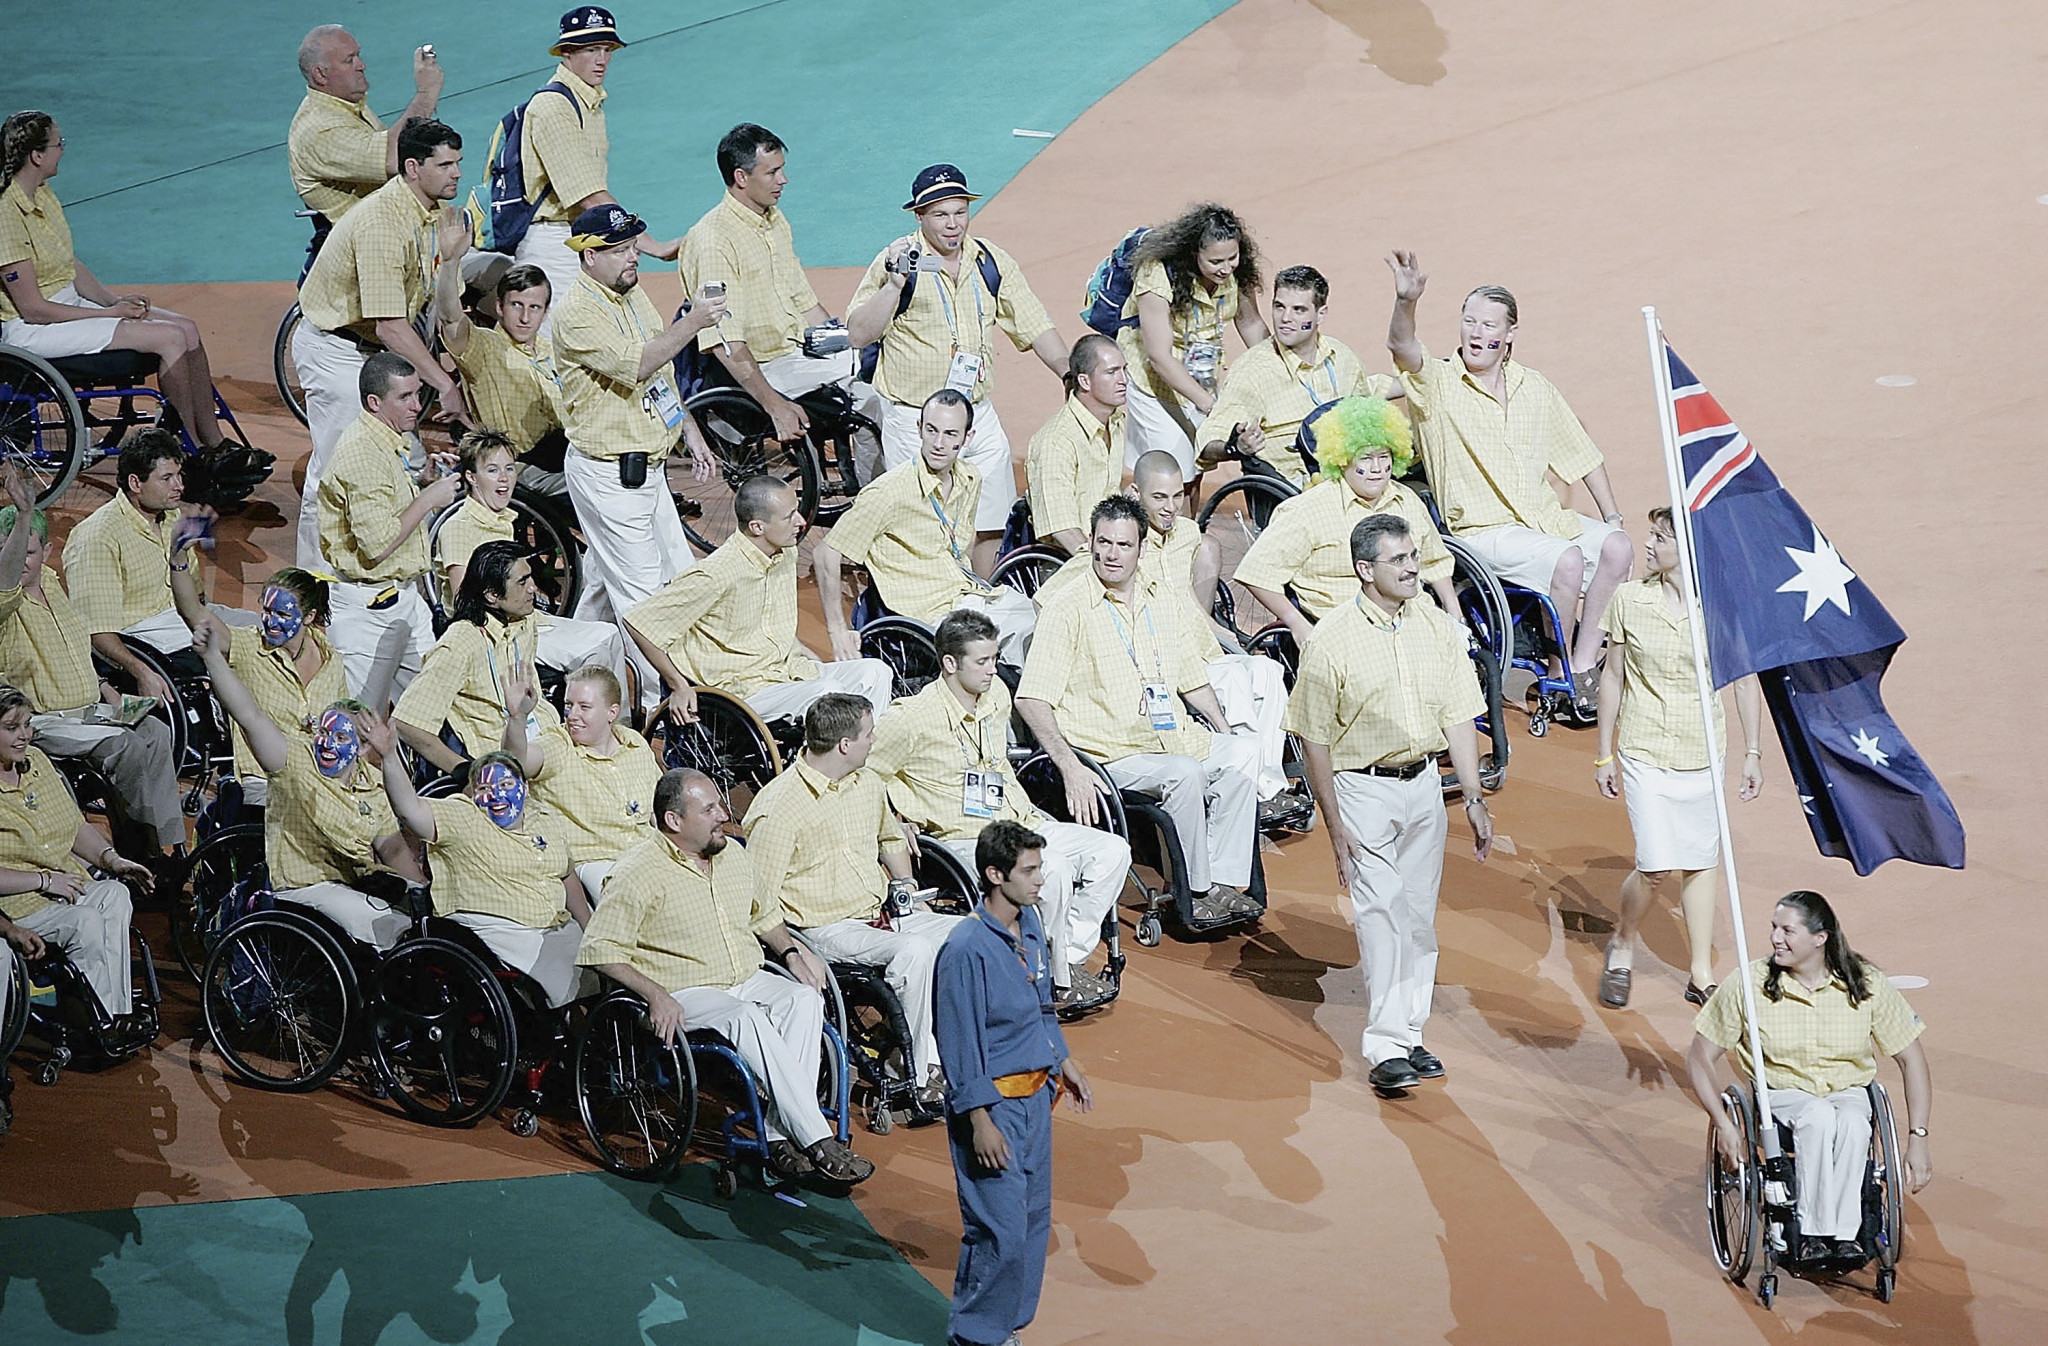 Sauvage was Australia's flagbearer at the Paralympics Opening Ceremony at Athens 2004 ©Getty Images